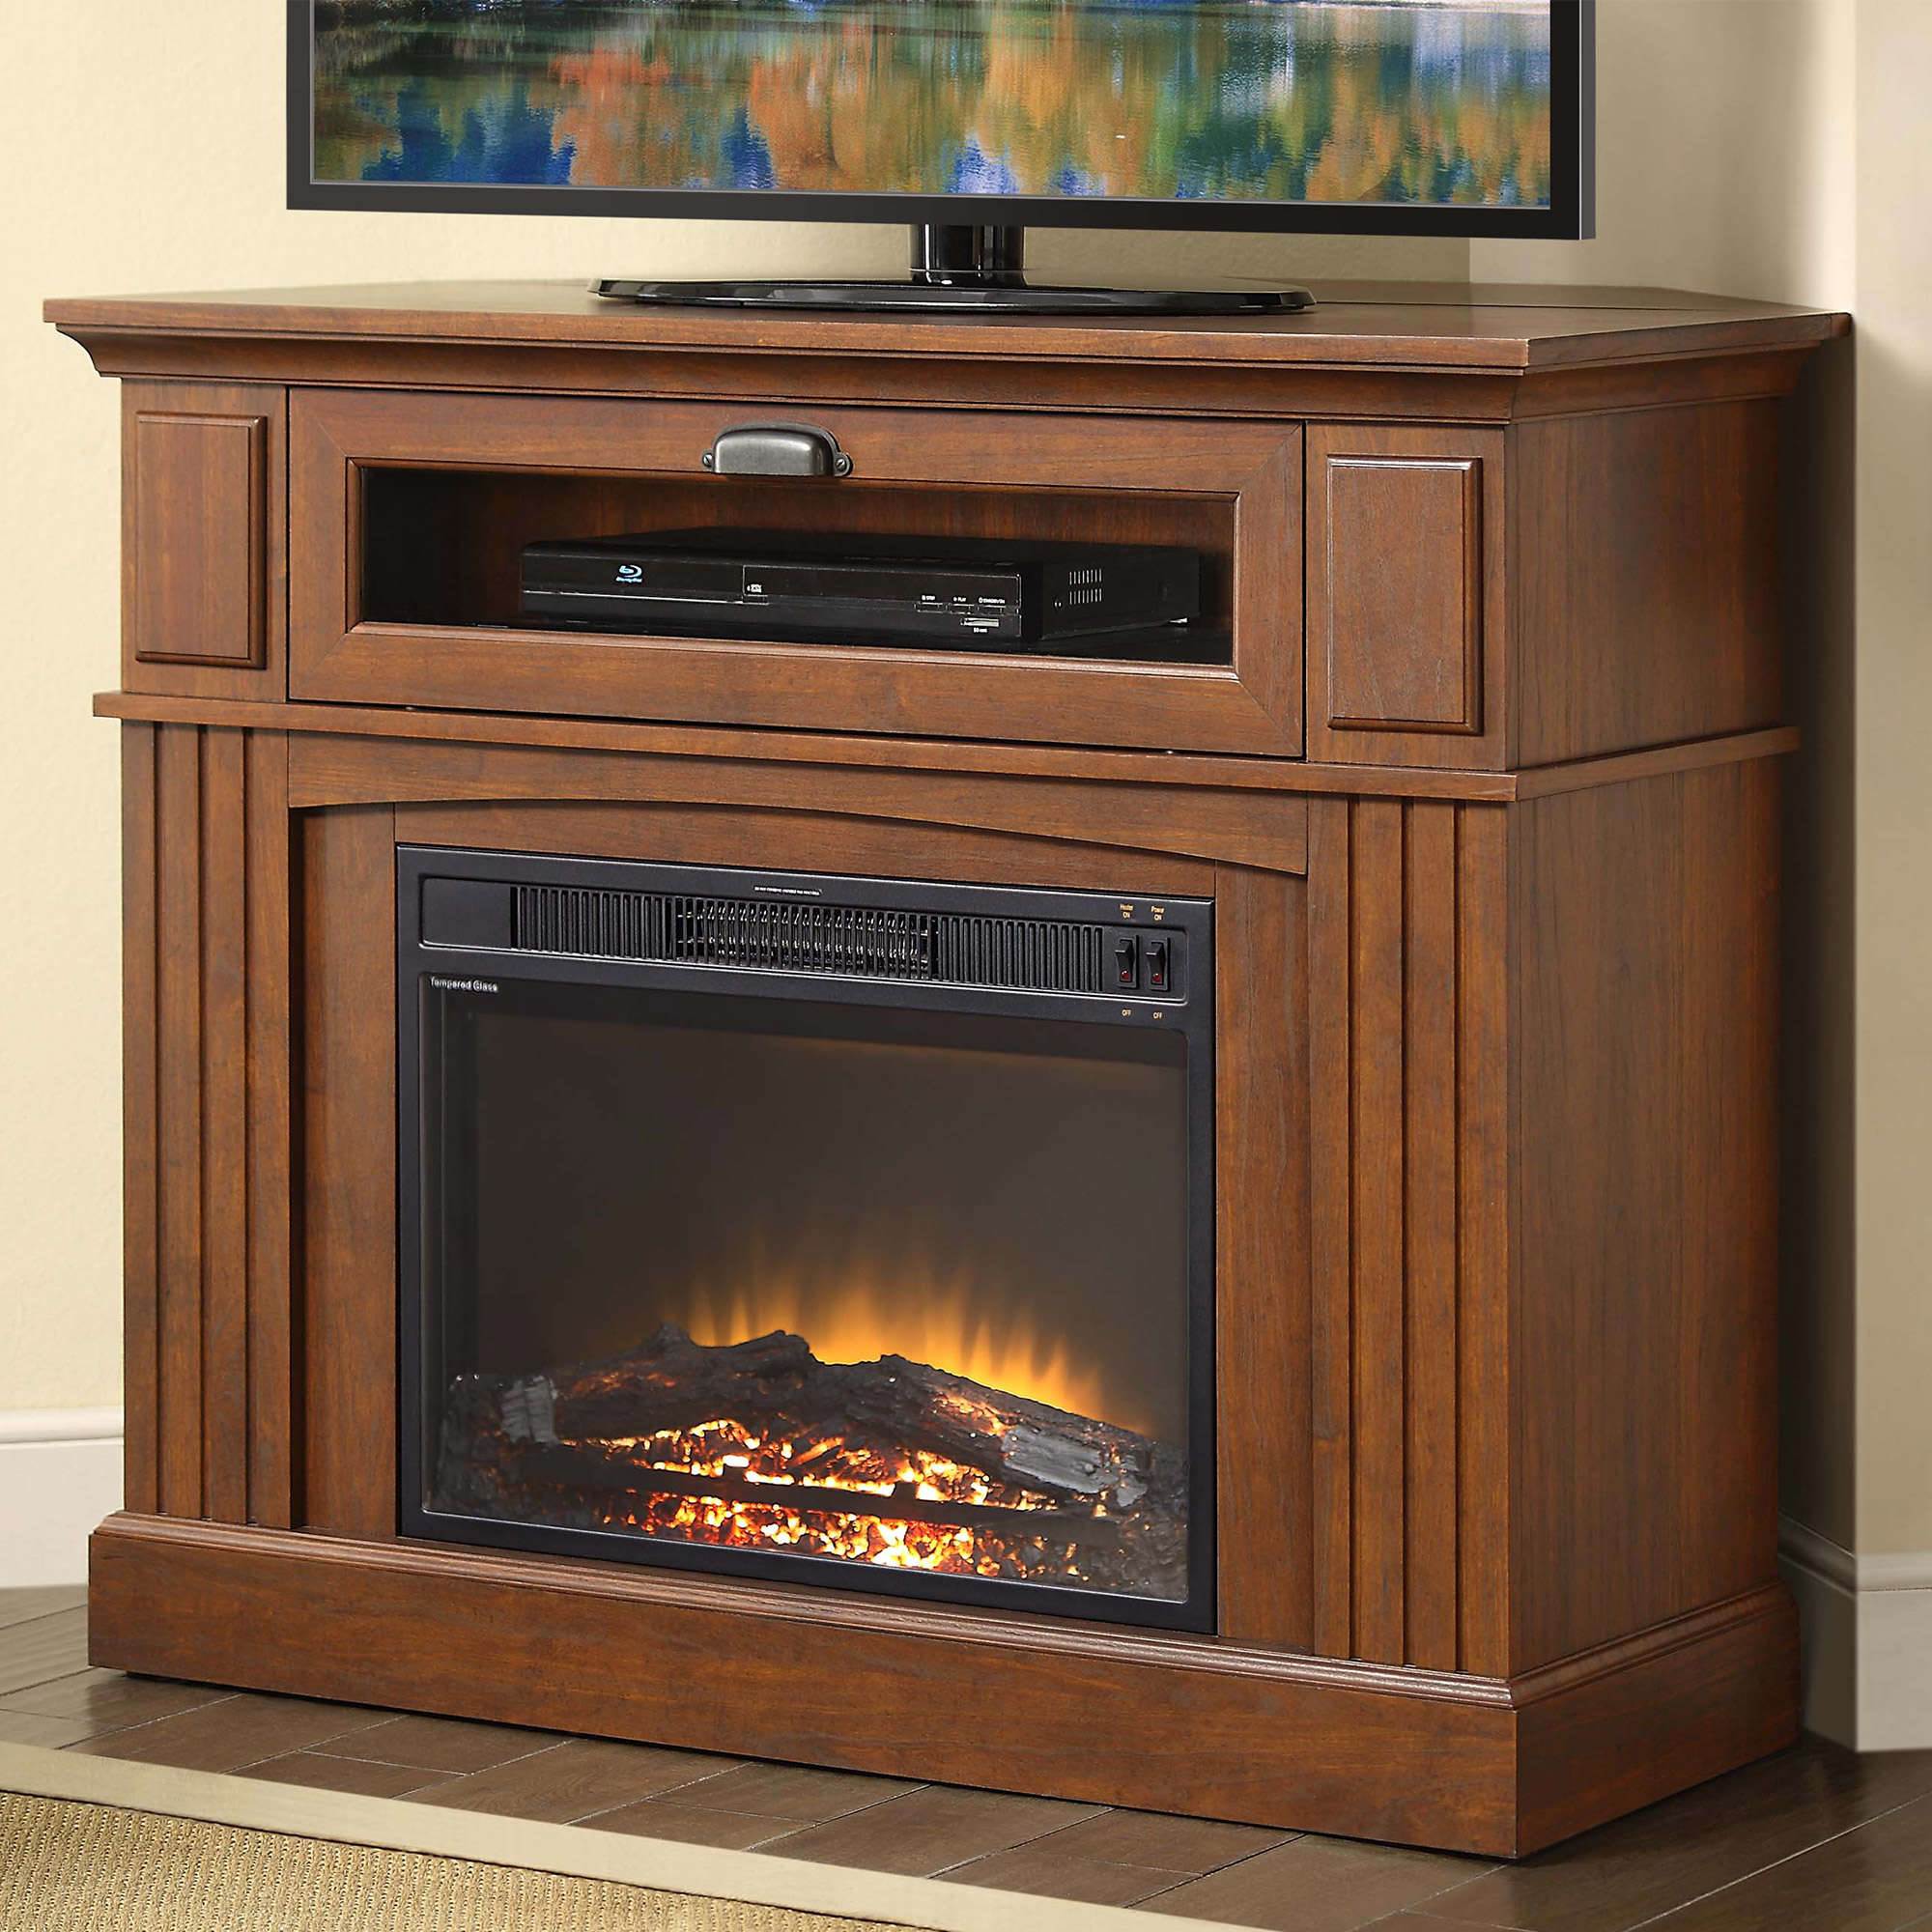 Corner Electric Fireplace with Mantel Fresh Corner Electric Fireplace Tv Stand